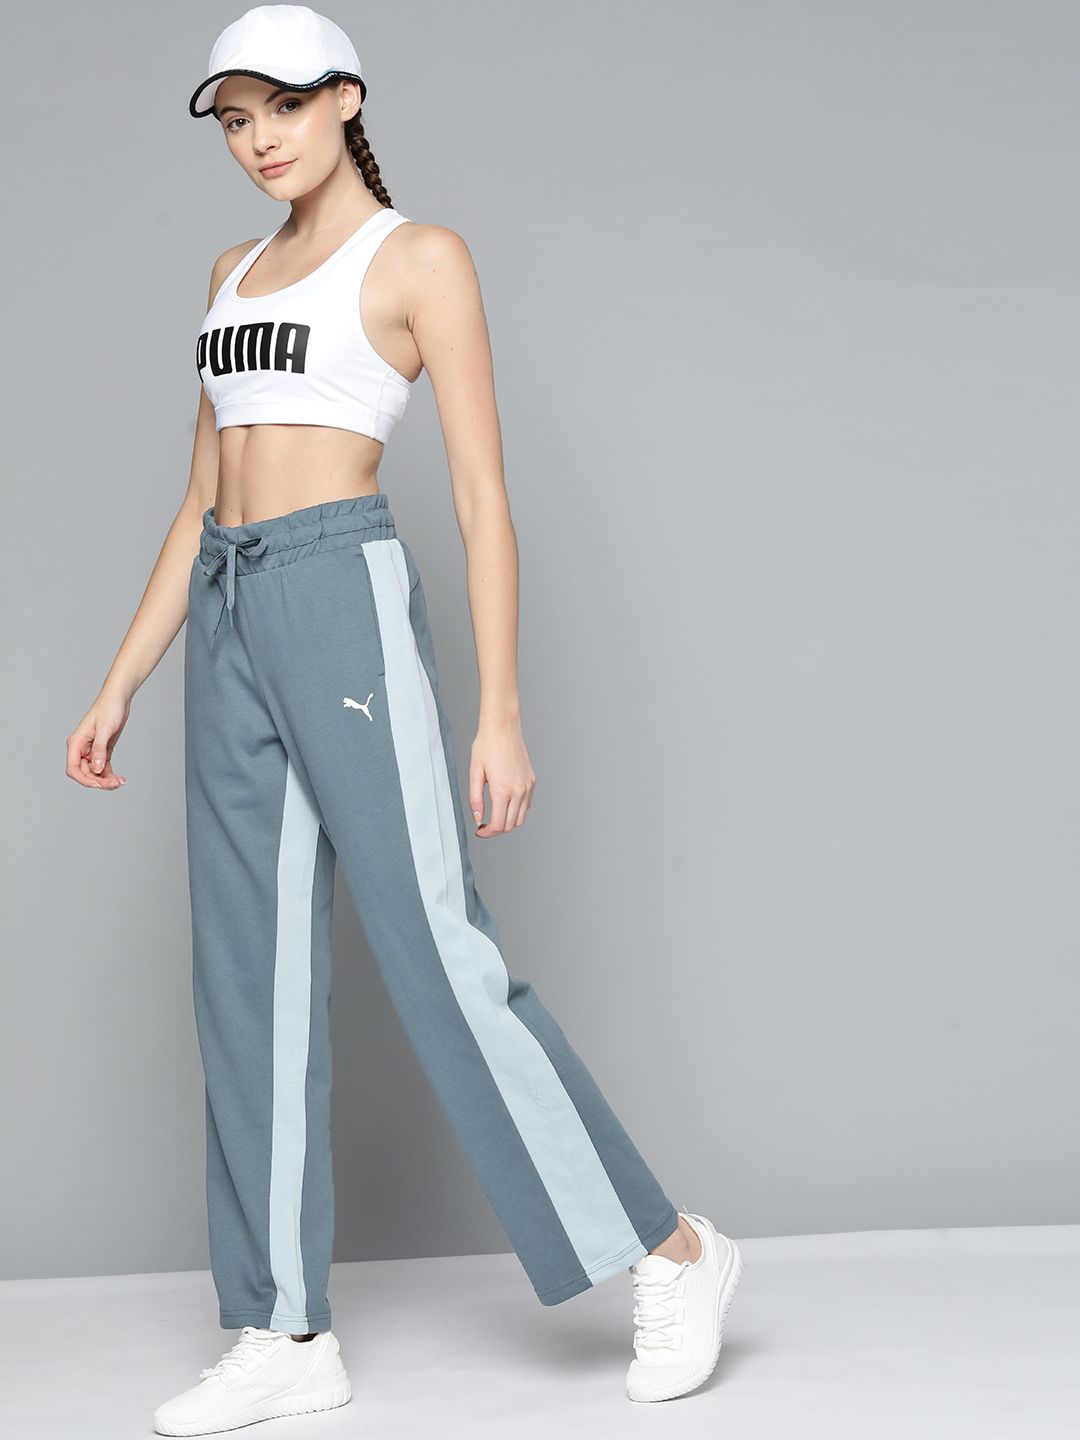 Puma Women Grey Modern Sports Solid Dry Cell Joggers With Side Stripes Price in India